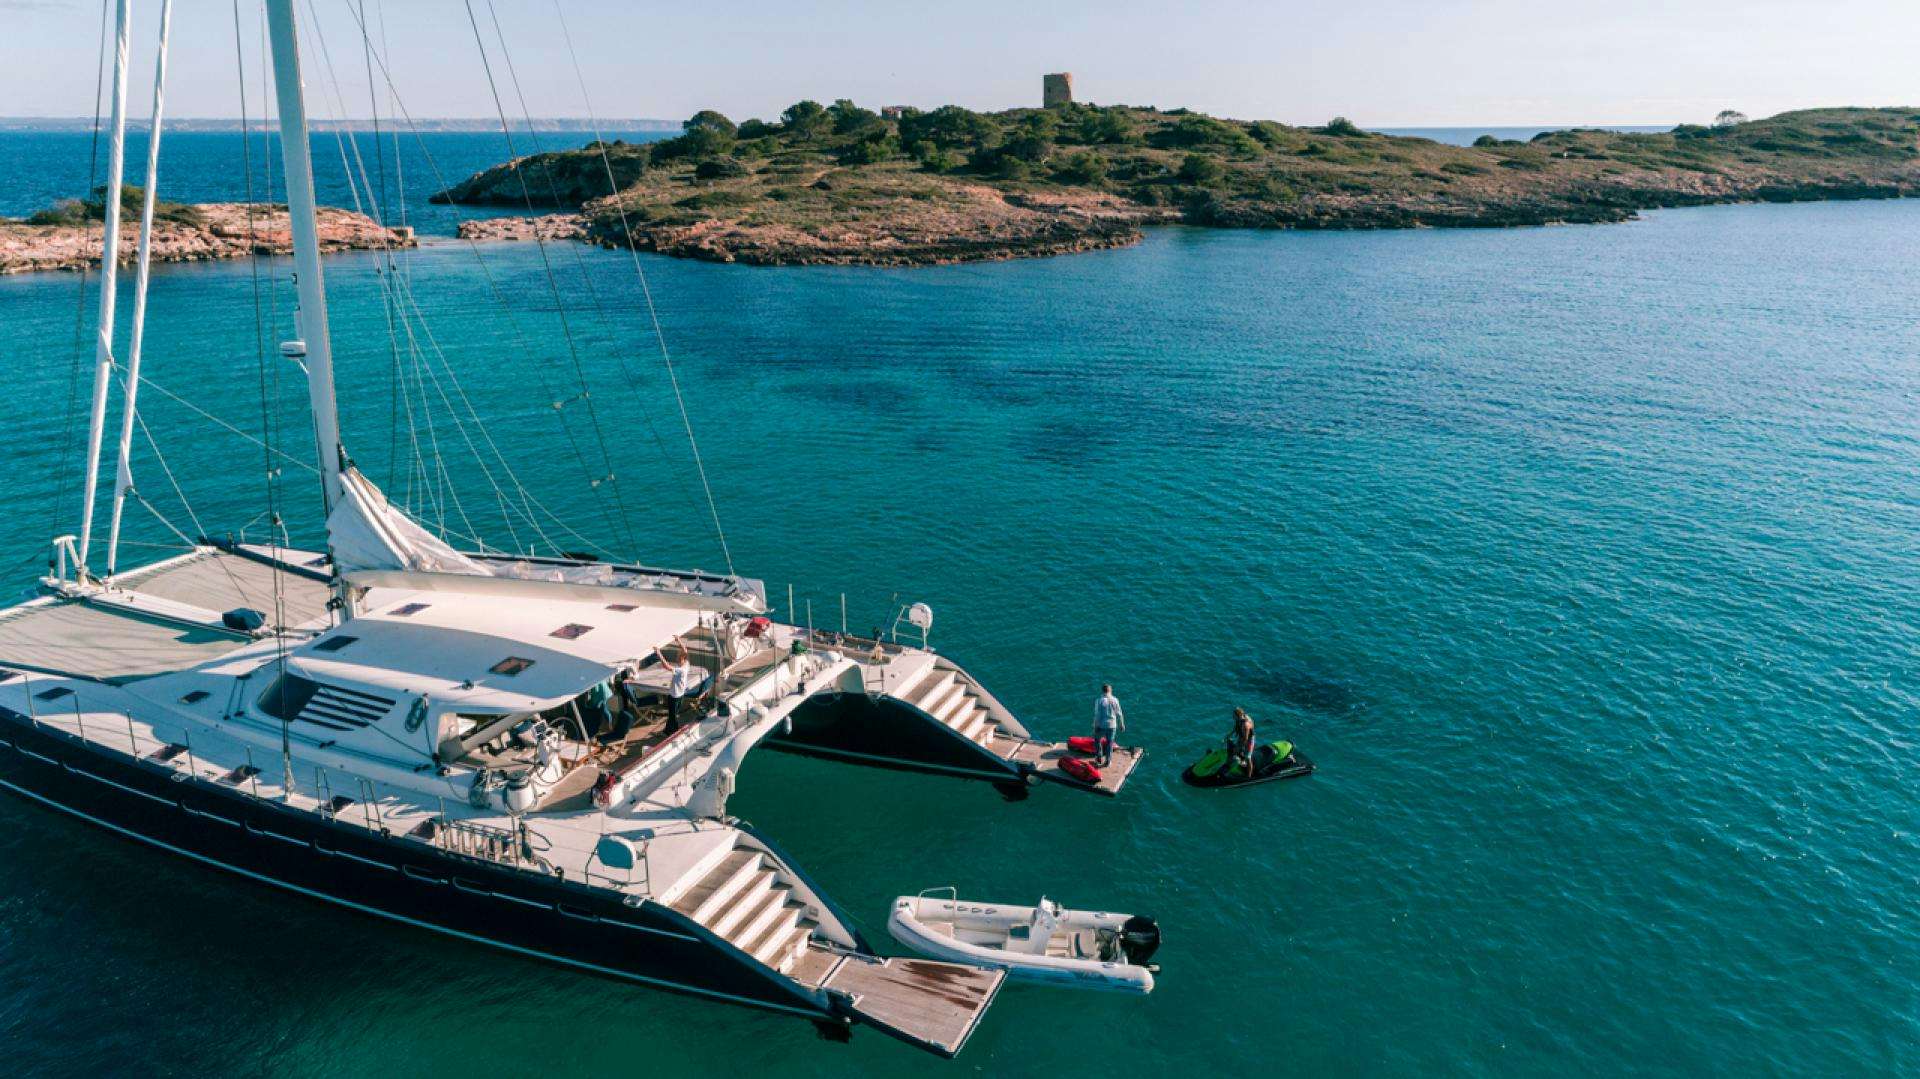 Azizam
Yacht for Sale